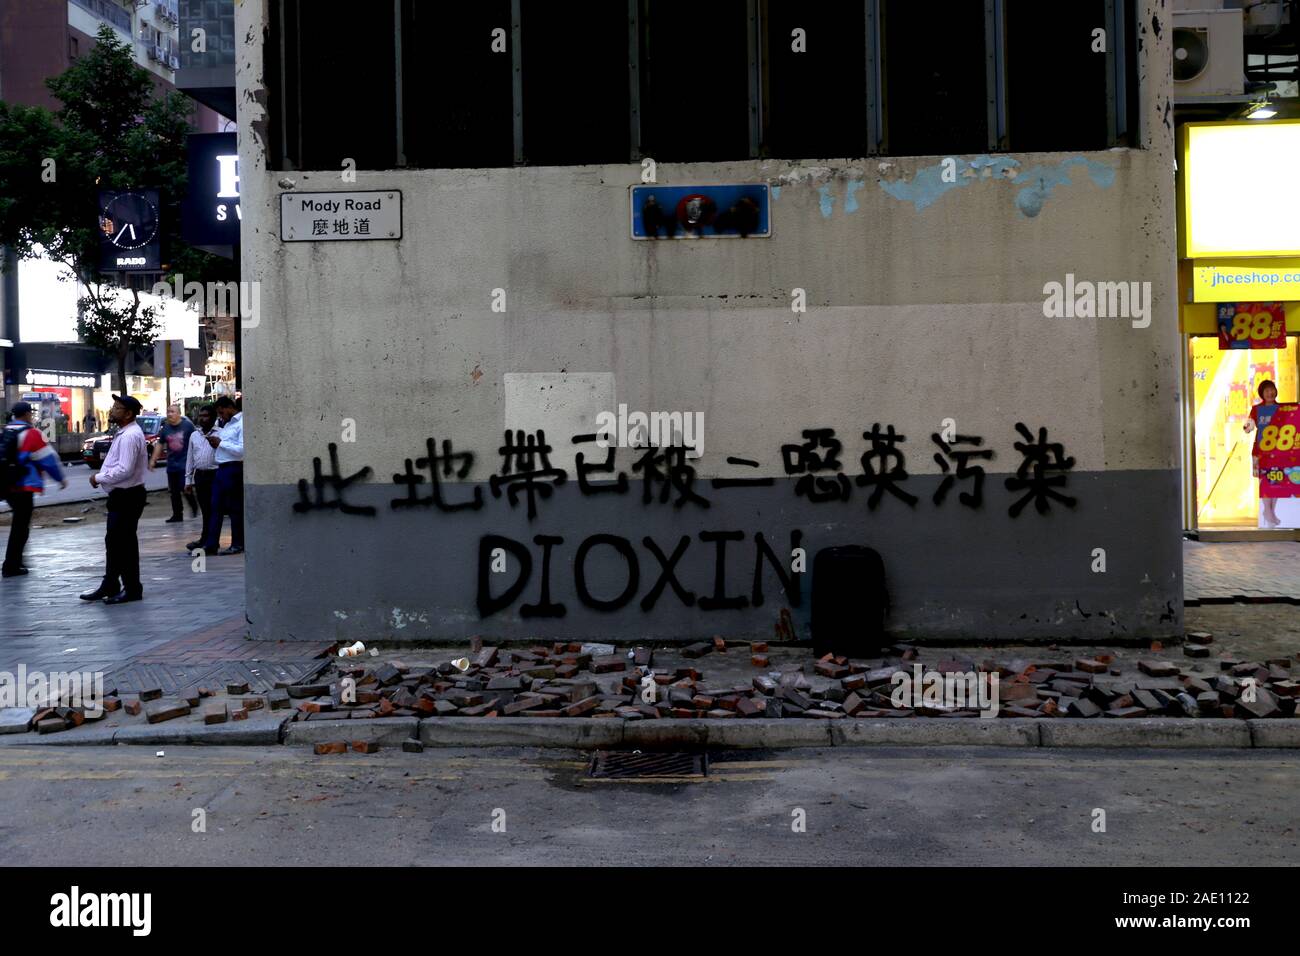 'Dioxin' can be seen spray painted the day after fierce clashes saw 2,000 rounds of tear gas fired, leading to public health concerns. Stock Photo